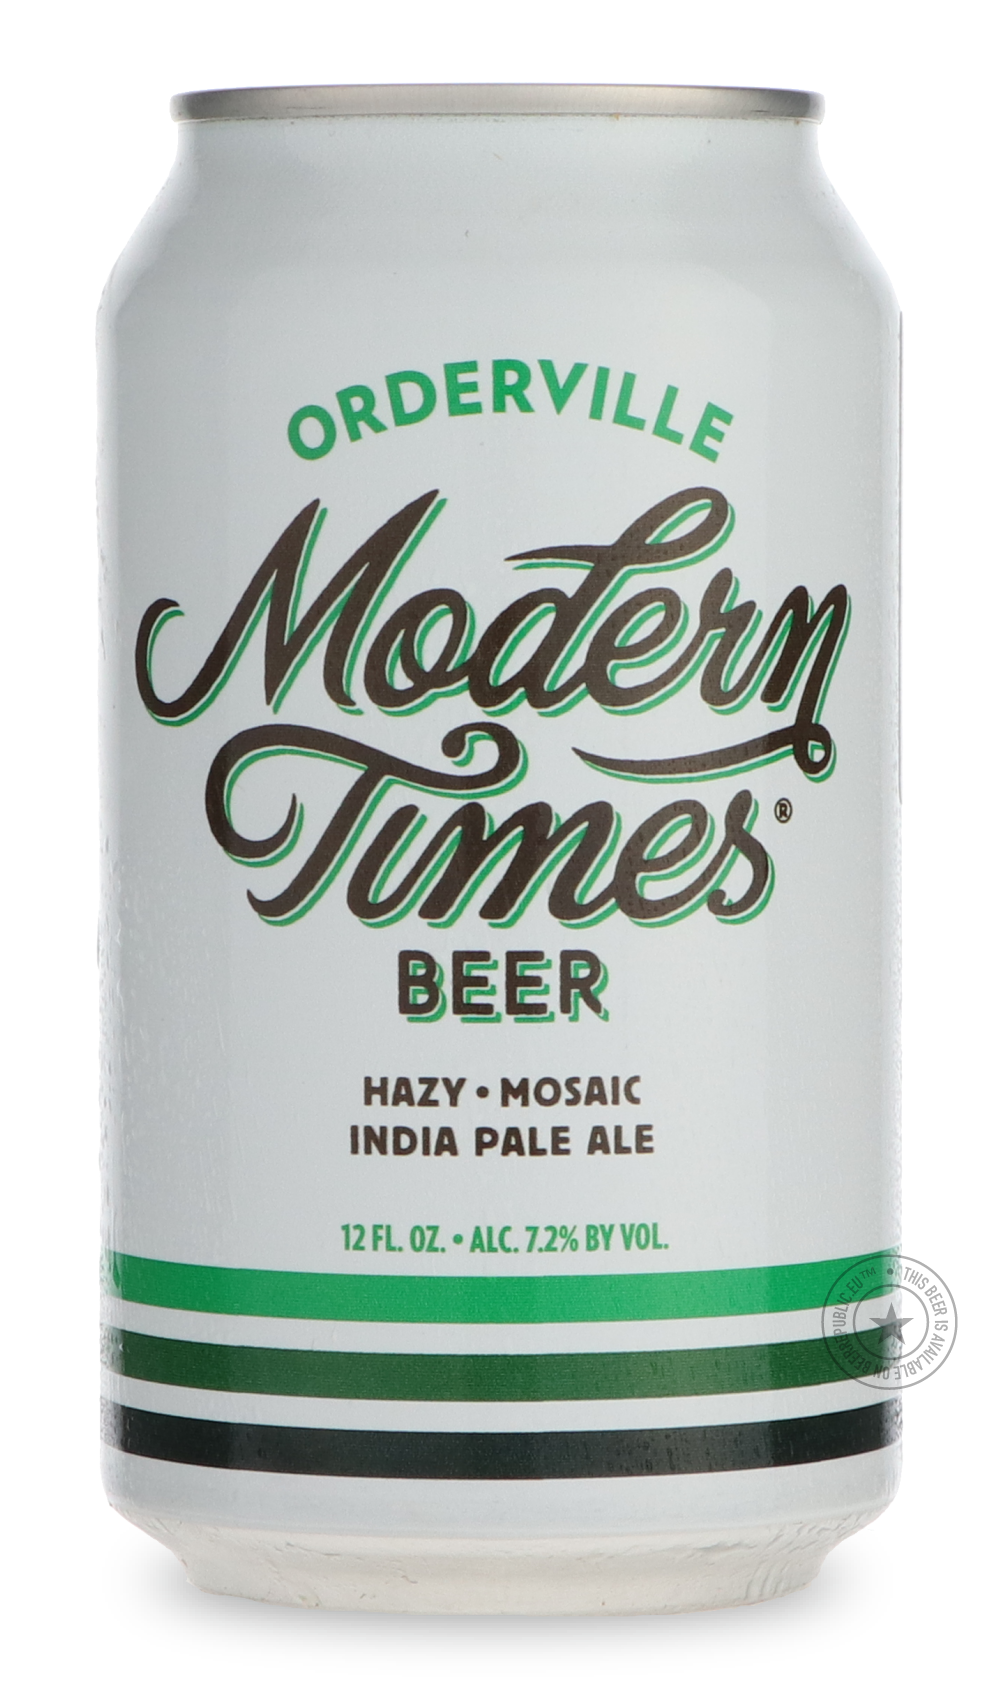 -Modern Times- Orderville-IPA- Only @ Beer Republic - The best online beer store for American & Canadian craft beer - Buy beer online from the USA and Canada - Bier online kopen - Amerikaans bier kopen - Craft beer store - Craft beer kopen - Amerikanisch bier kaufen - Bier online kaufen - Acheter biere online - IPA - Stout - Porter - New England IPA - Hazy IPA - Imperial Stout - Barrel Aged - Barrel Aged Imperial Stout - Brown - Dark beer - Blond - Blonde - Pilsner - Lager - Wheat - Weizen - Amber - Barley 